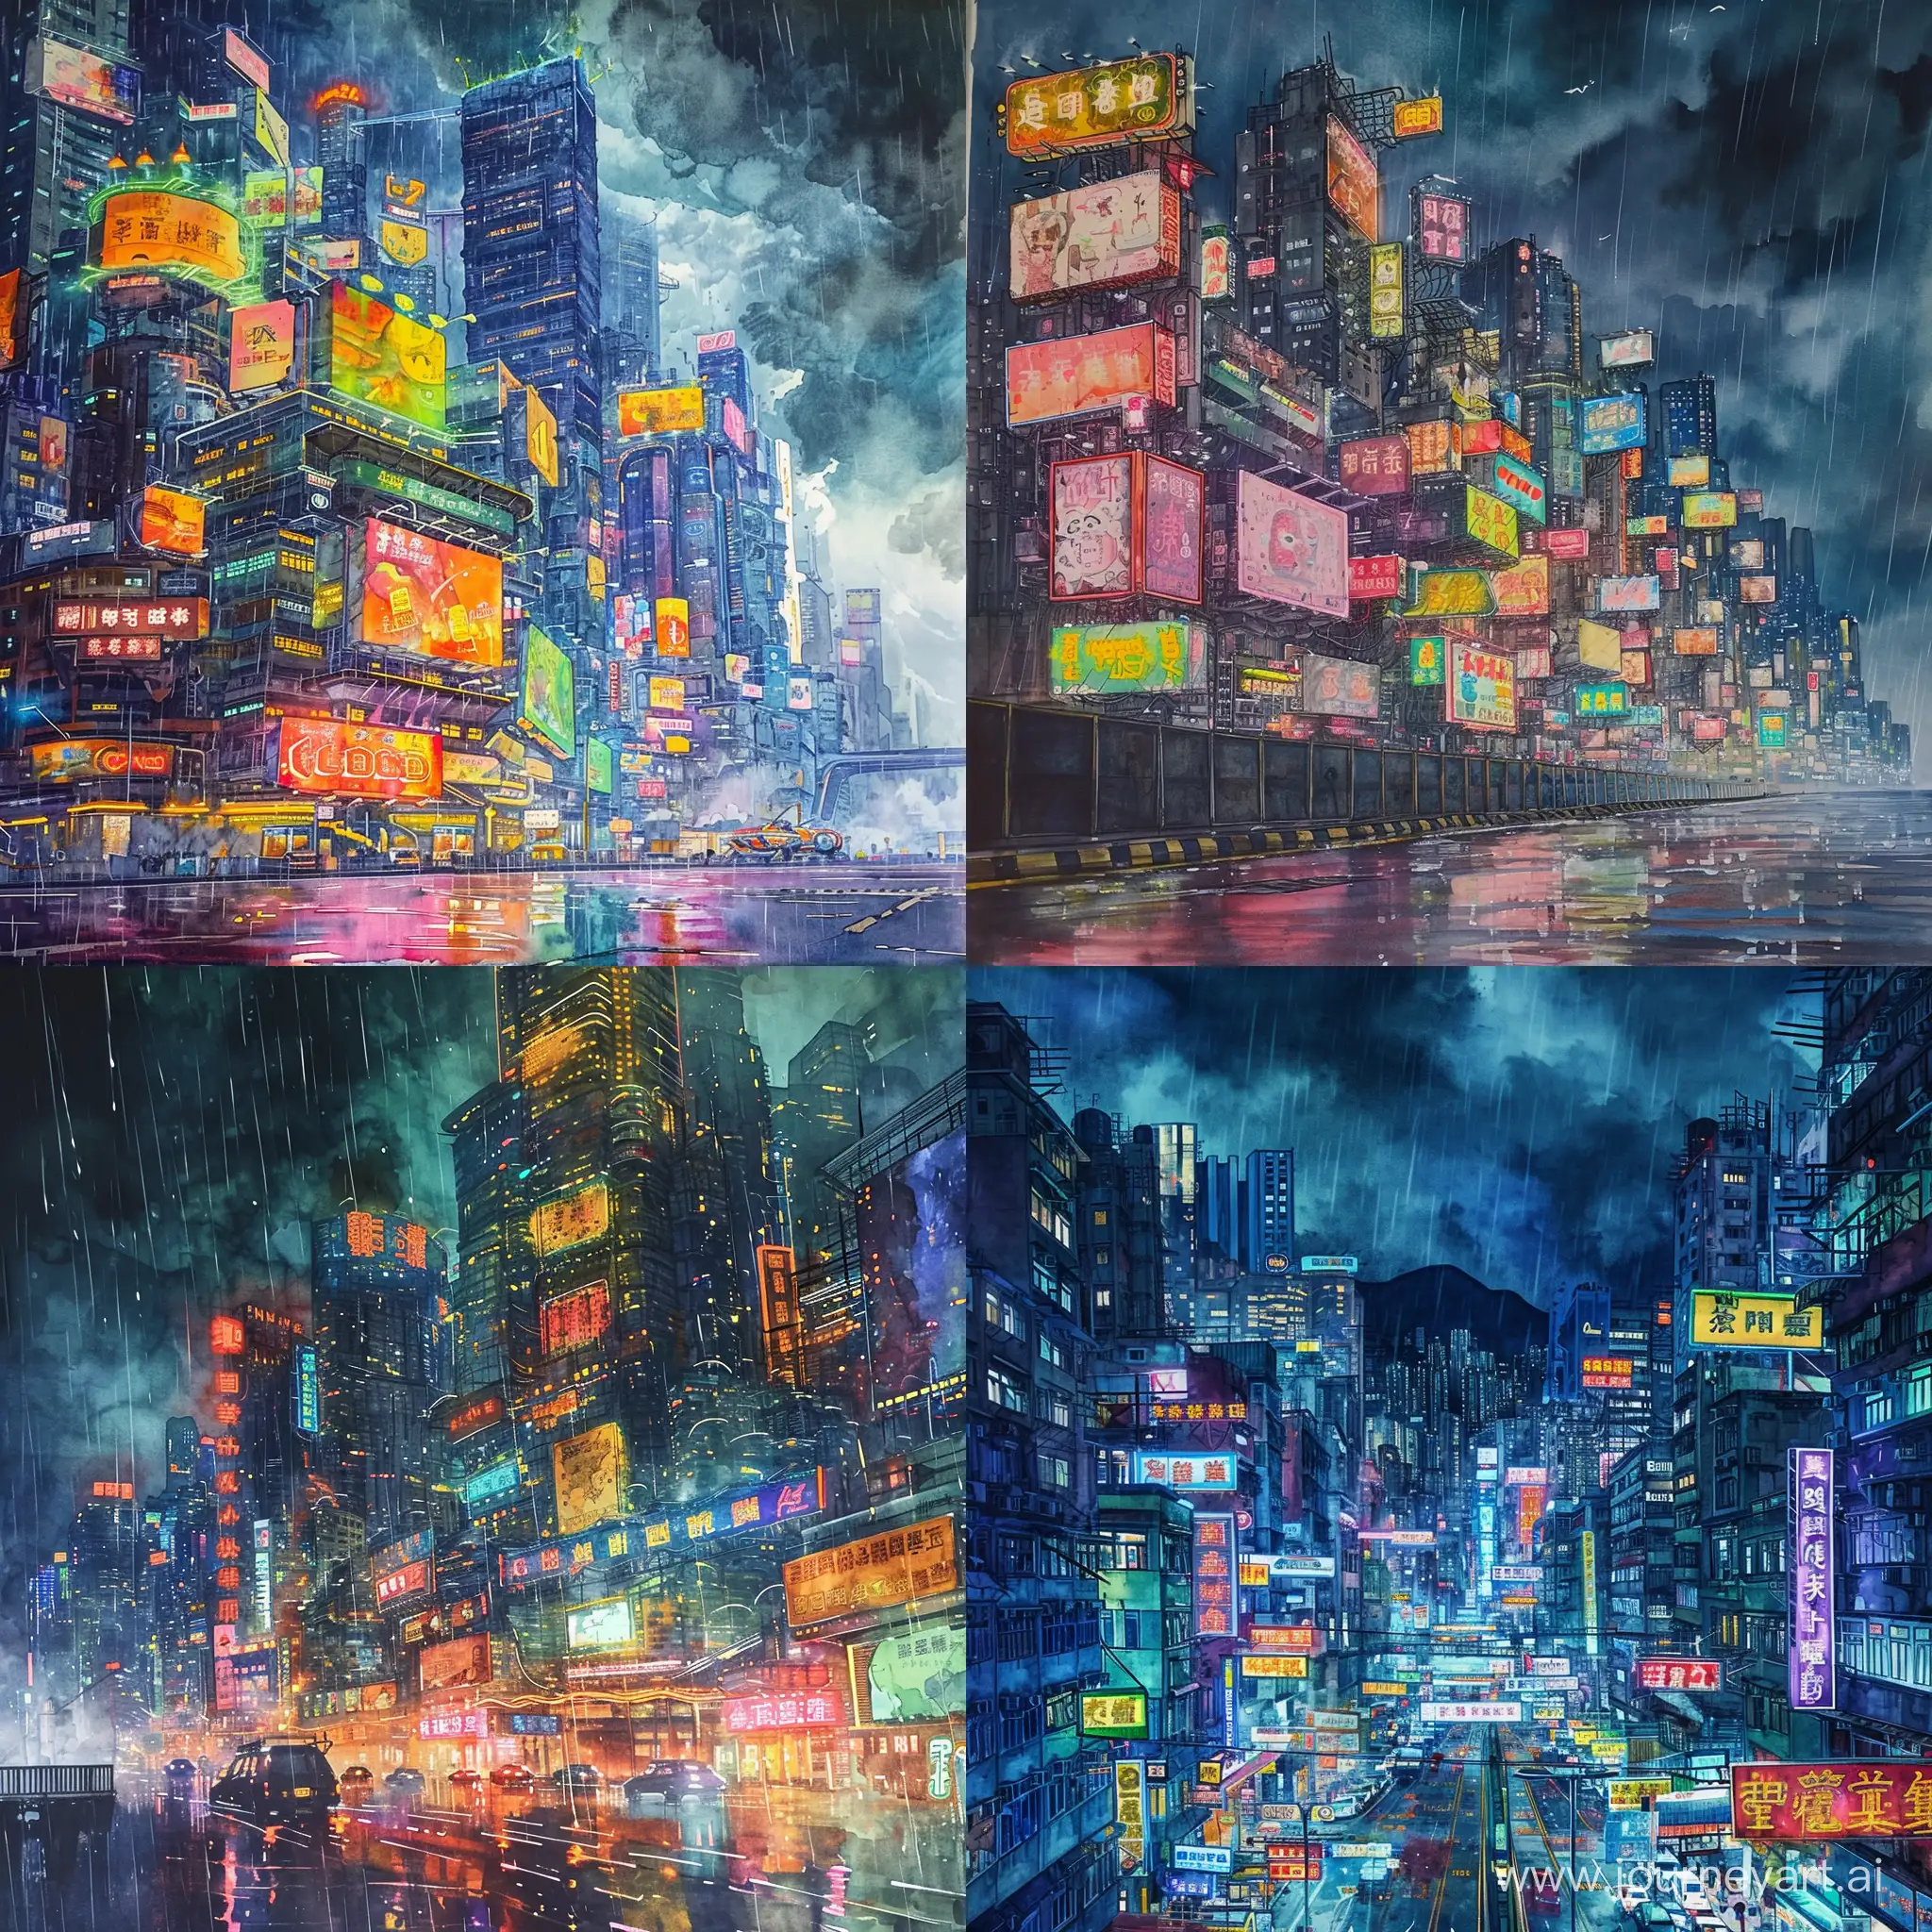 A massive neon kowloon walled futuristic cyberpunk city during a stormy day, watercolor